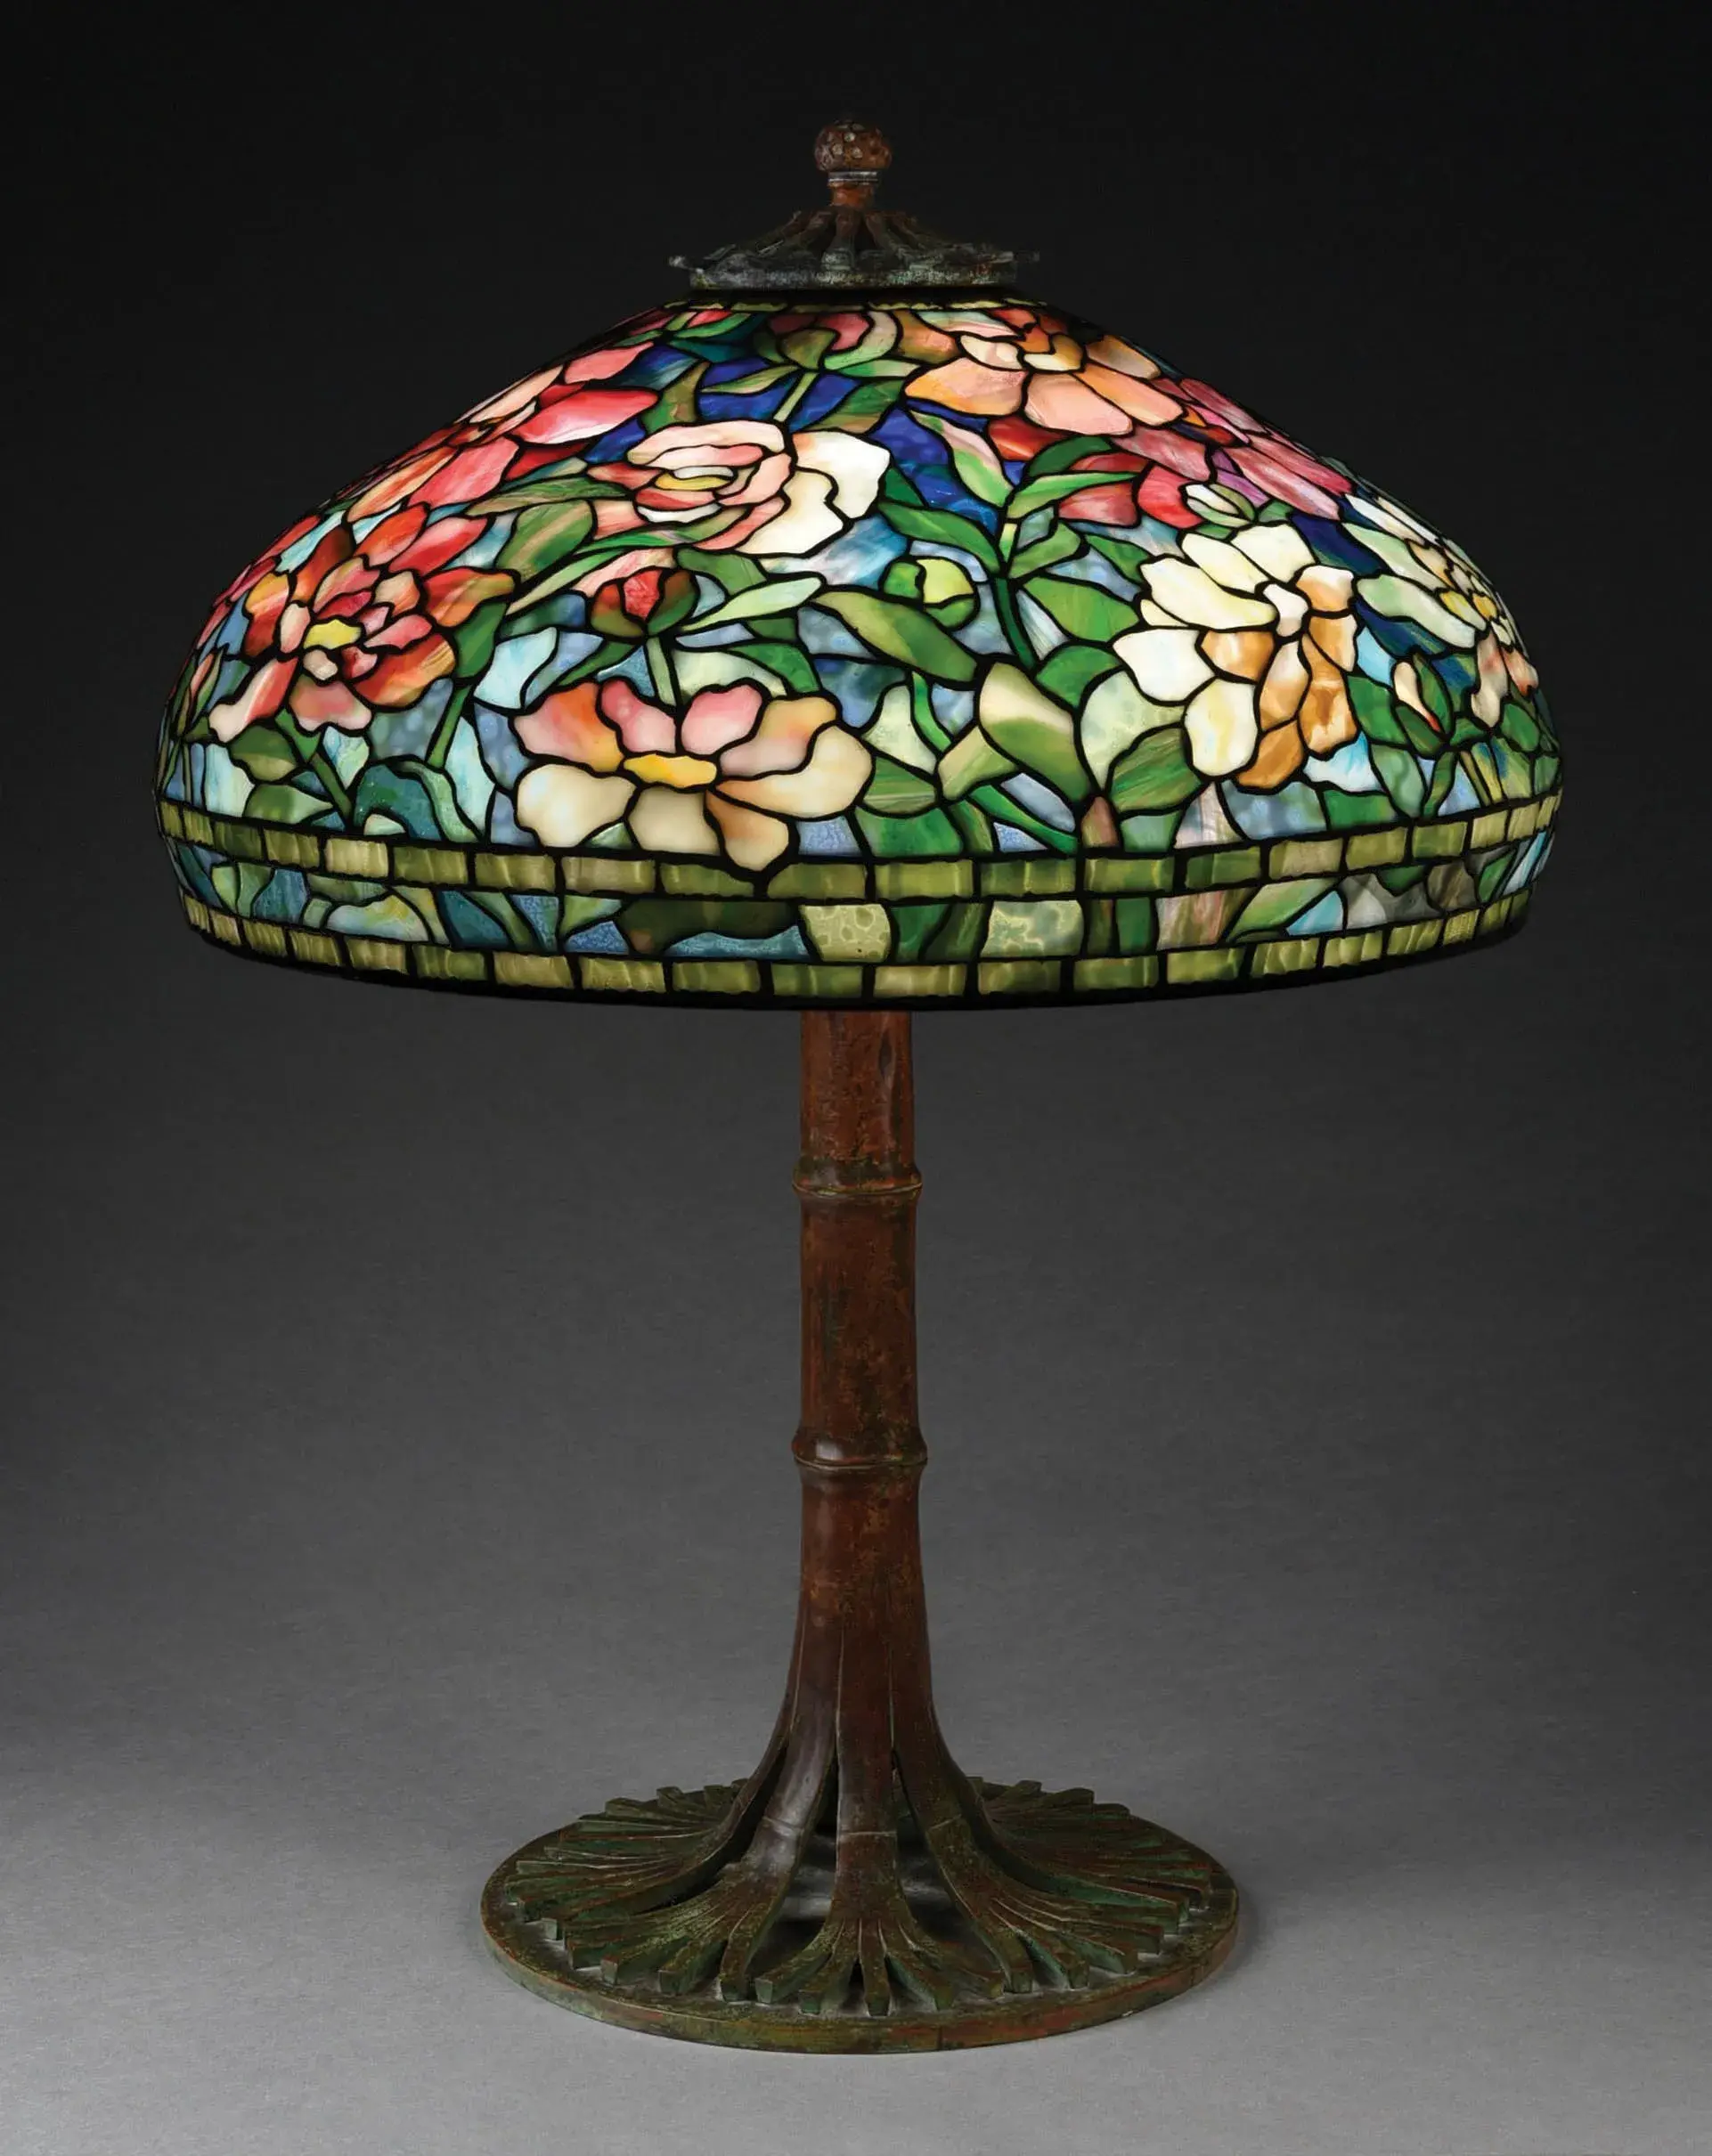 Tiffany Studios ‘Peony’ leaded-glass lamp with multicolored background of mottled cobalt blues and streaked sky blues. Extensive multicolored confetti glass with wonderful transparency. Blossoms comprising numerous types of Tiffany glass, including granite-backed reds and highly mottled opalescent whites. Shade and base are signed by Tiffany. Provenance: shade formerly in Minna Rosenblatt collection; base previously sold at Sotheby’s. Sold within estimate range for $110,700